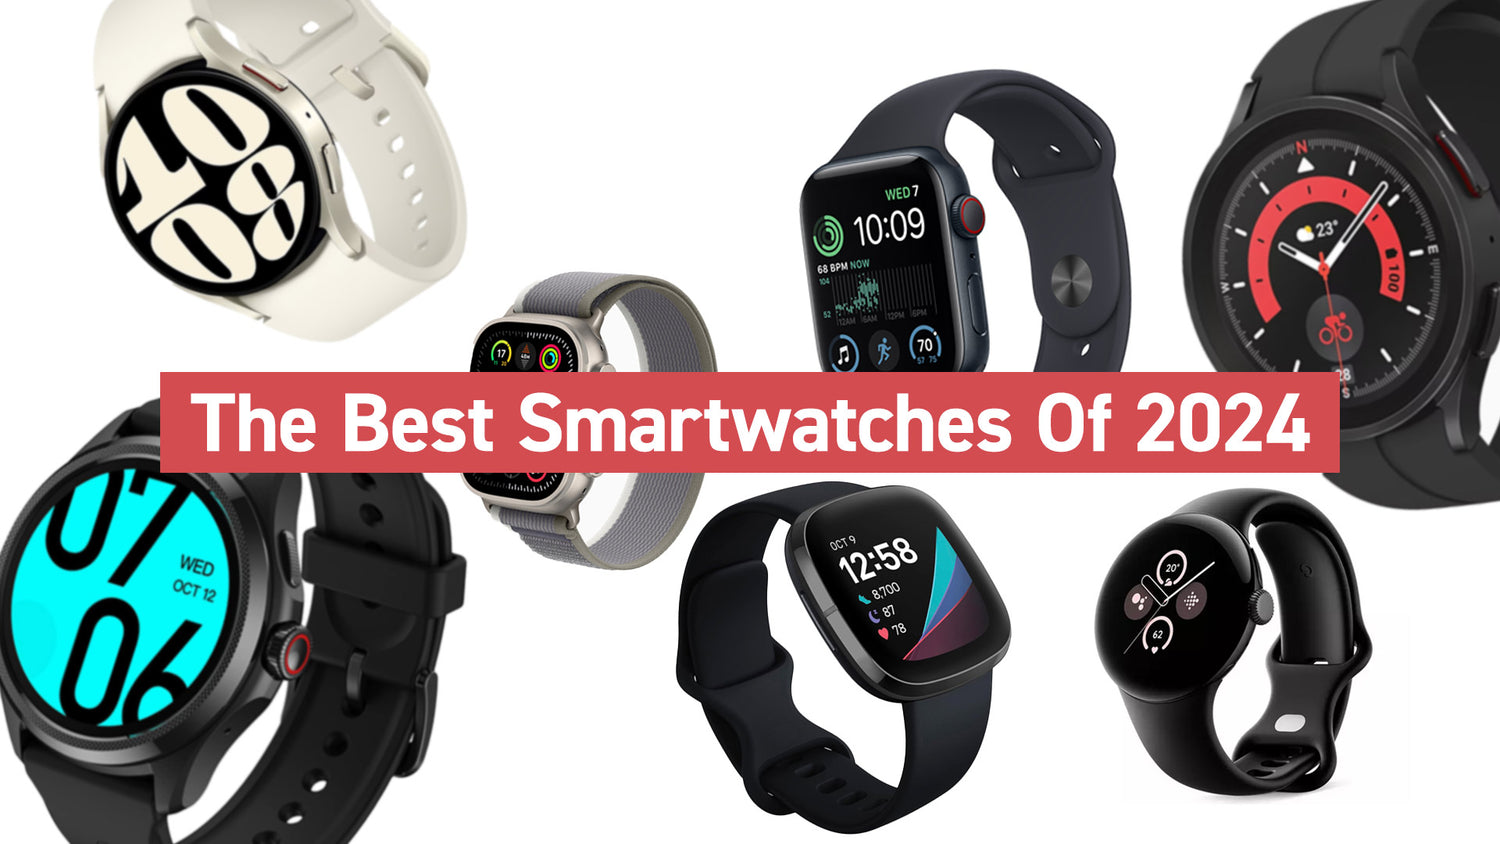 The Best Smartwatches Of 2024 RS Chrono